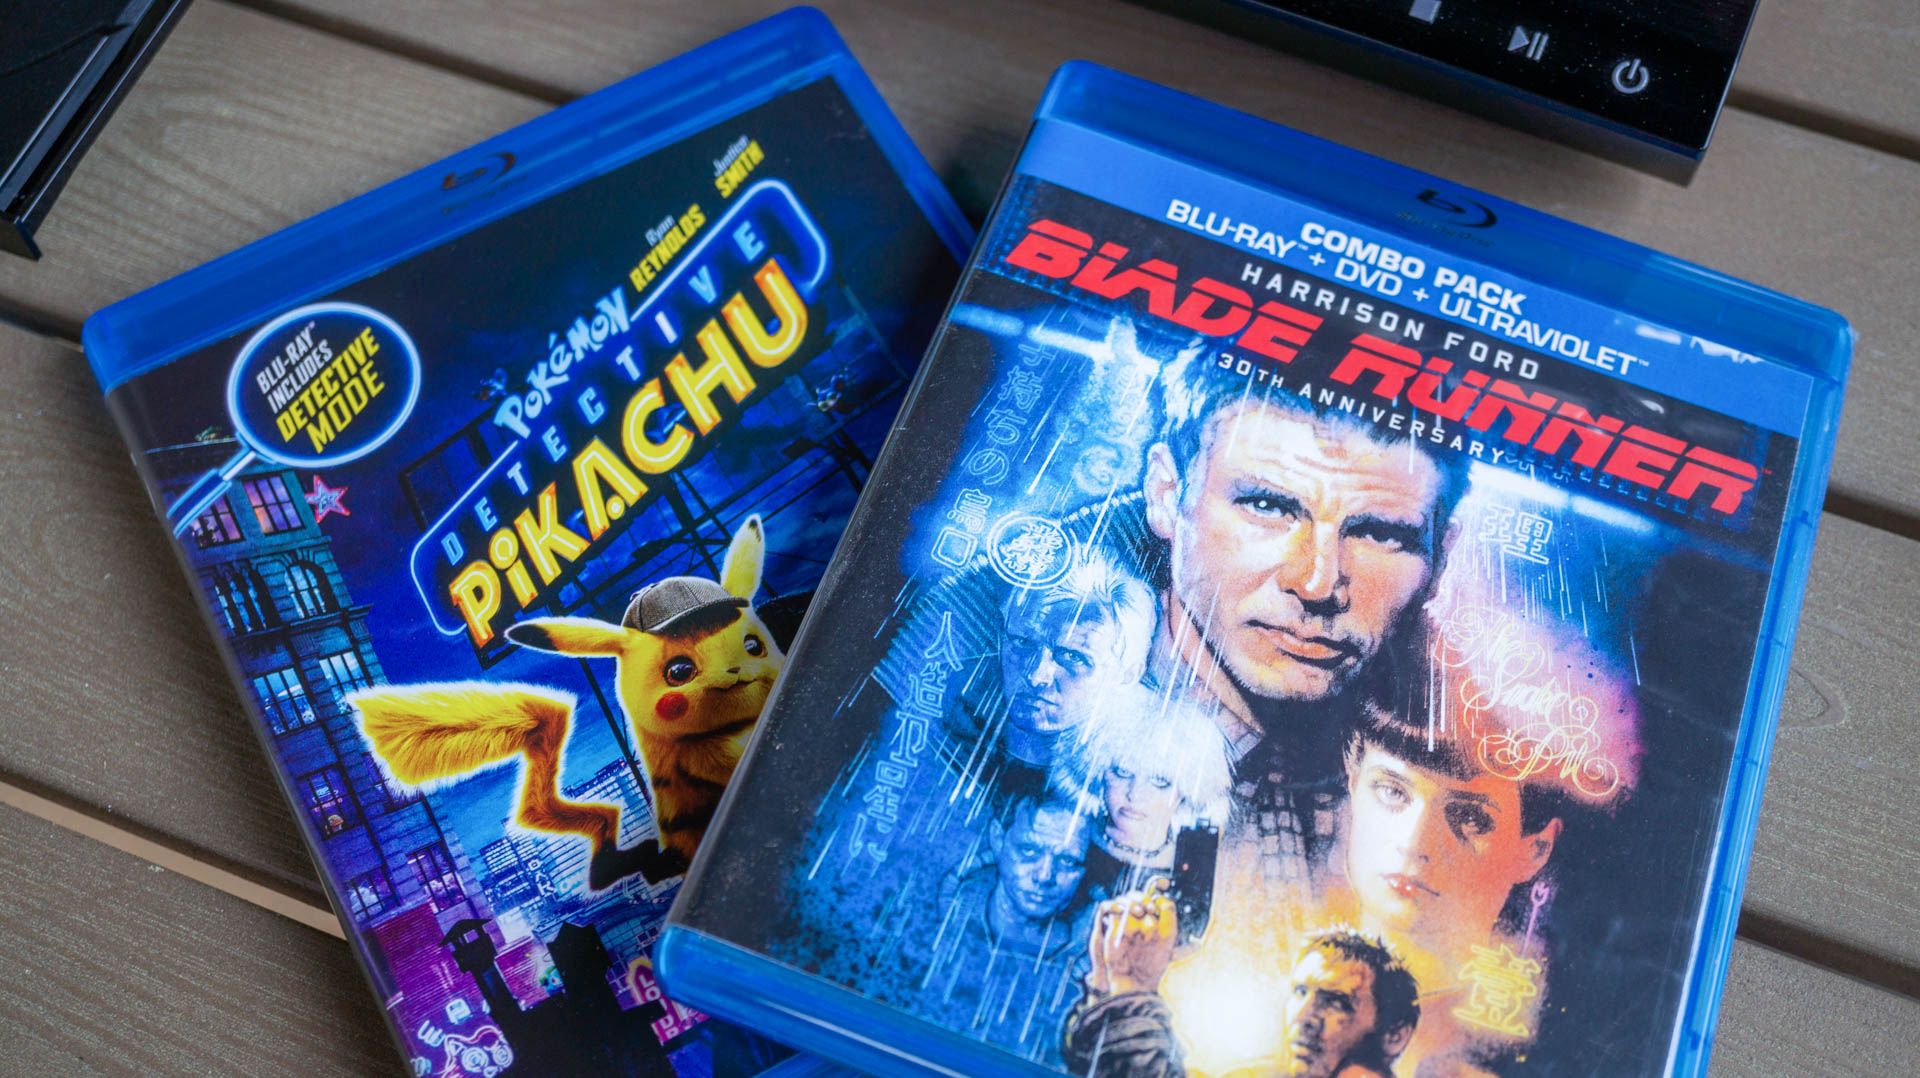 Blade Runner and Detective Pikachu on Blu-ray disc.